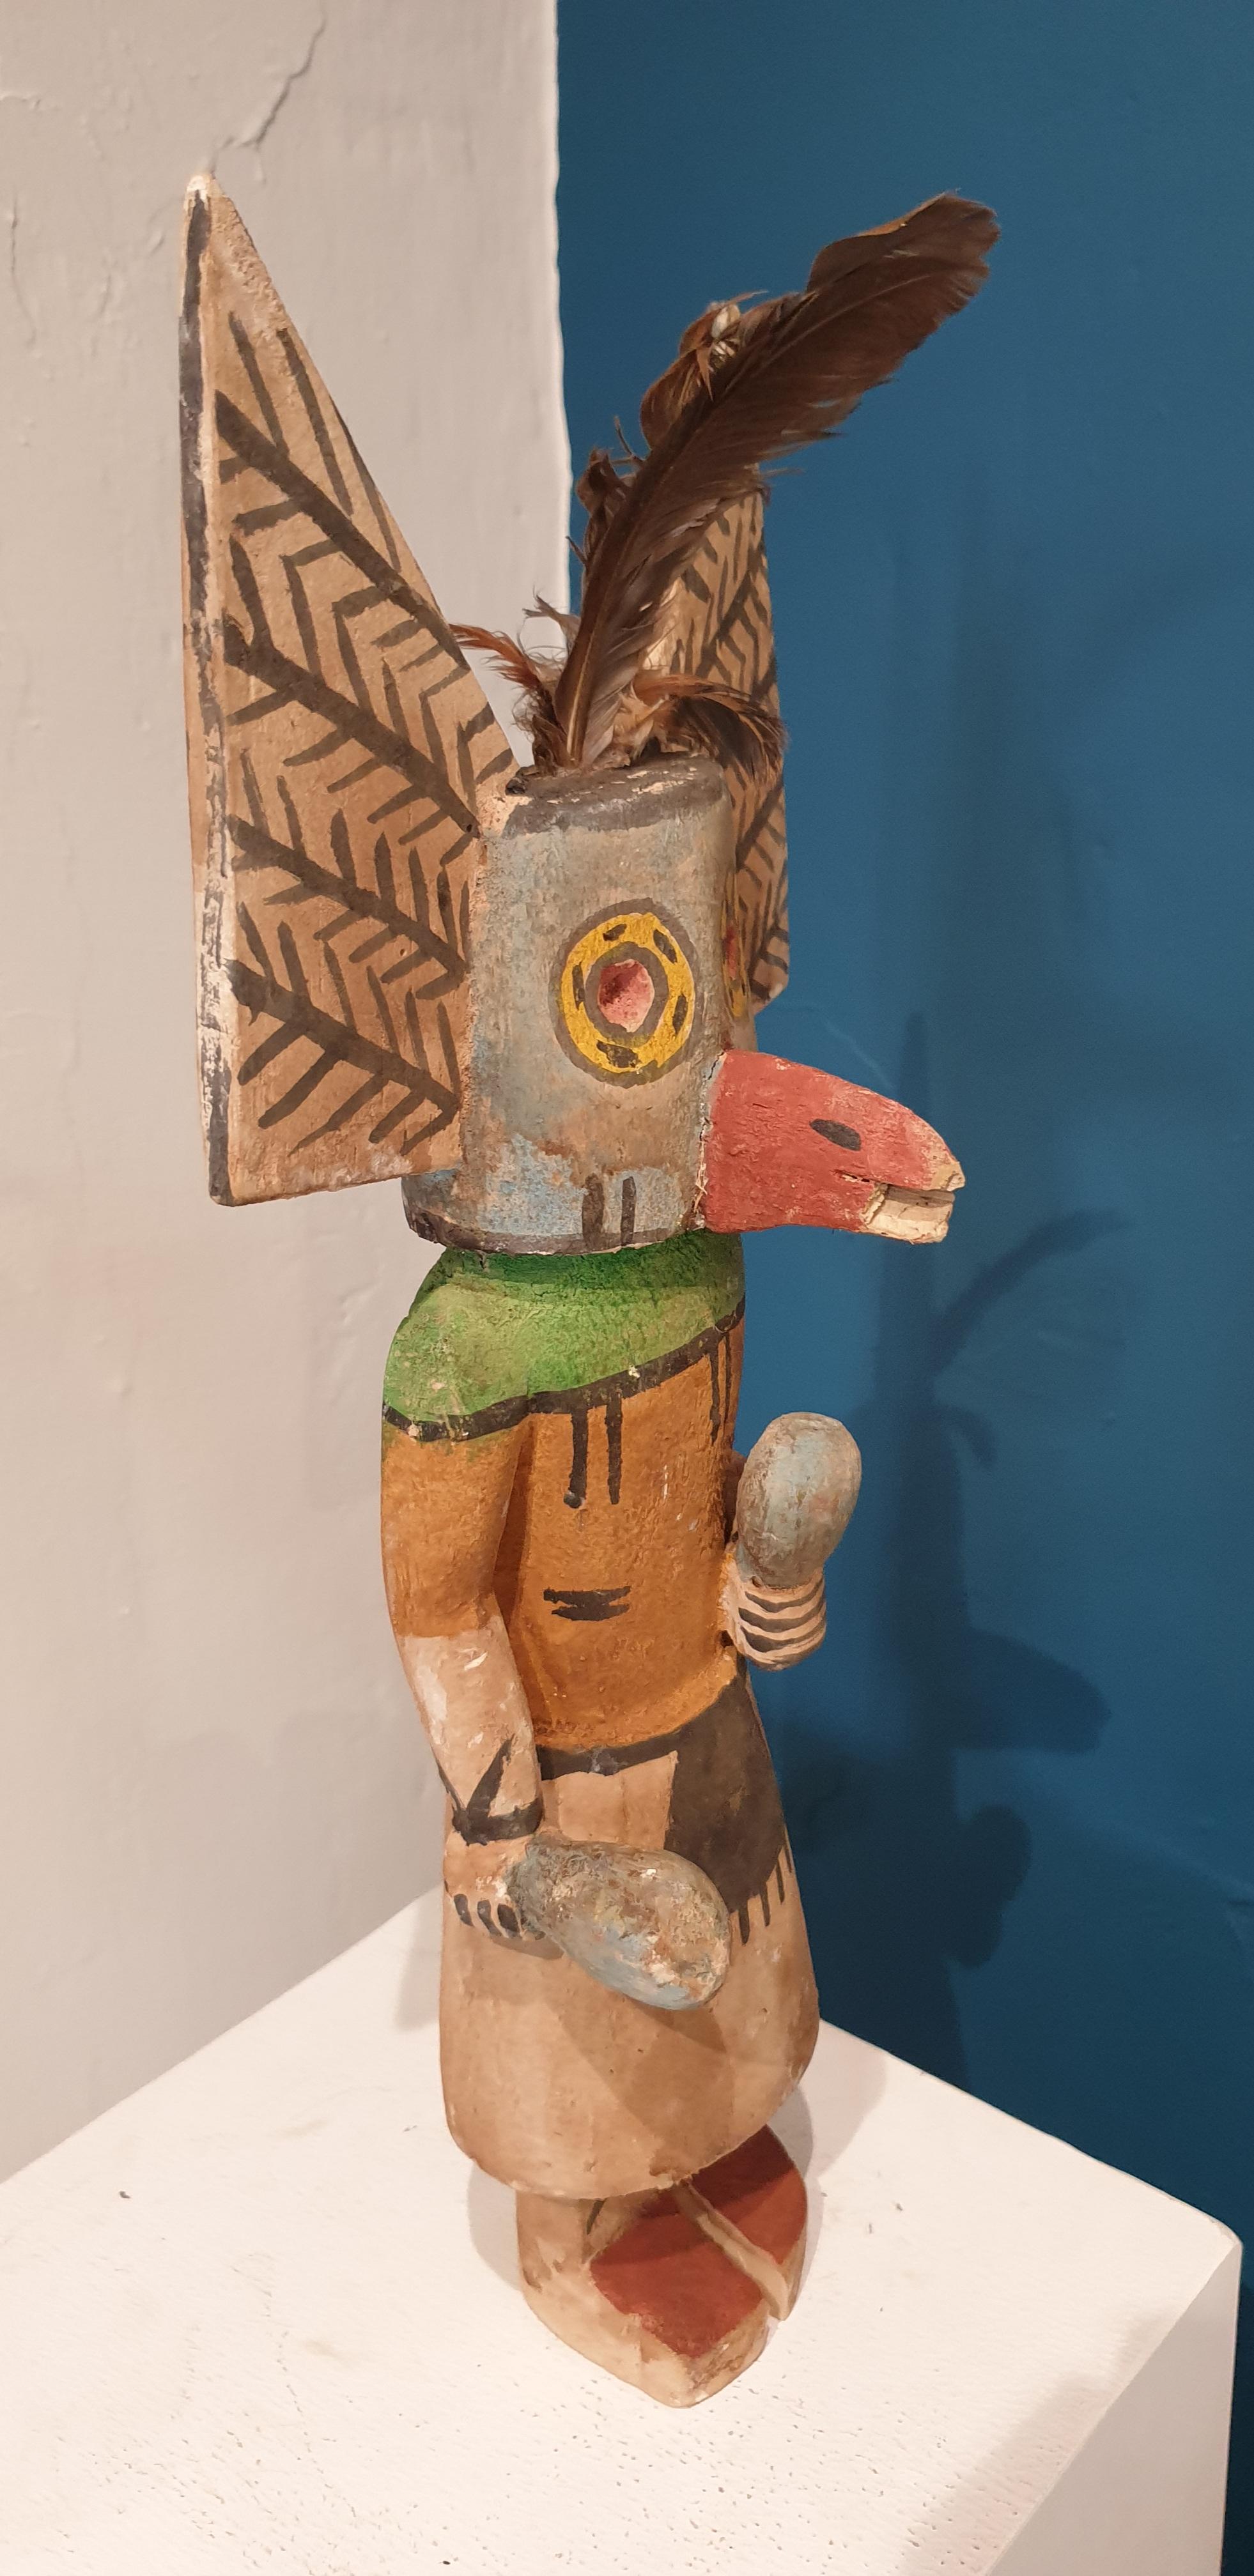 Native North American carved wood and painted effigy figure, Hopi Katsina or Kachina doll. 

Hopi Katsina dolls are wooden effigies of the Katsinam (plural), or benevolent spirit beings, who visit the Hopi for about half of every year. Traditionally